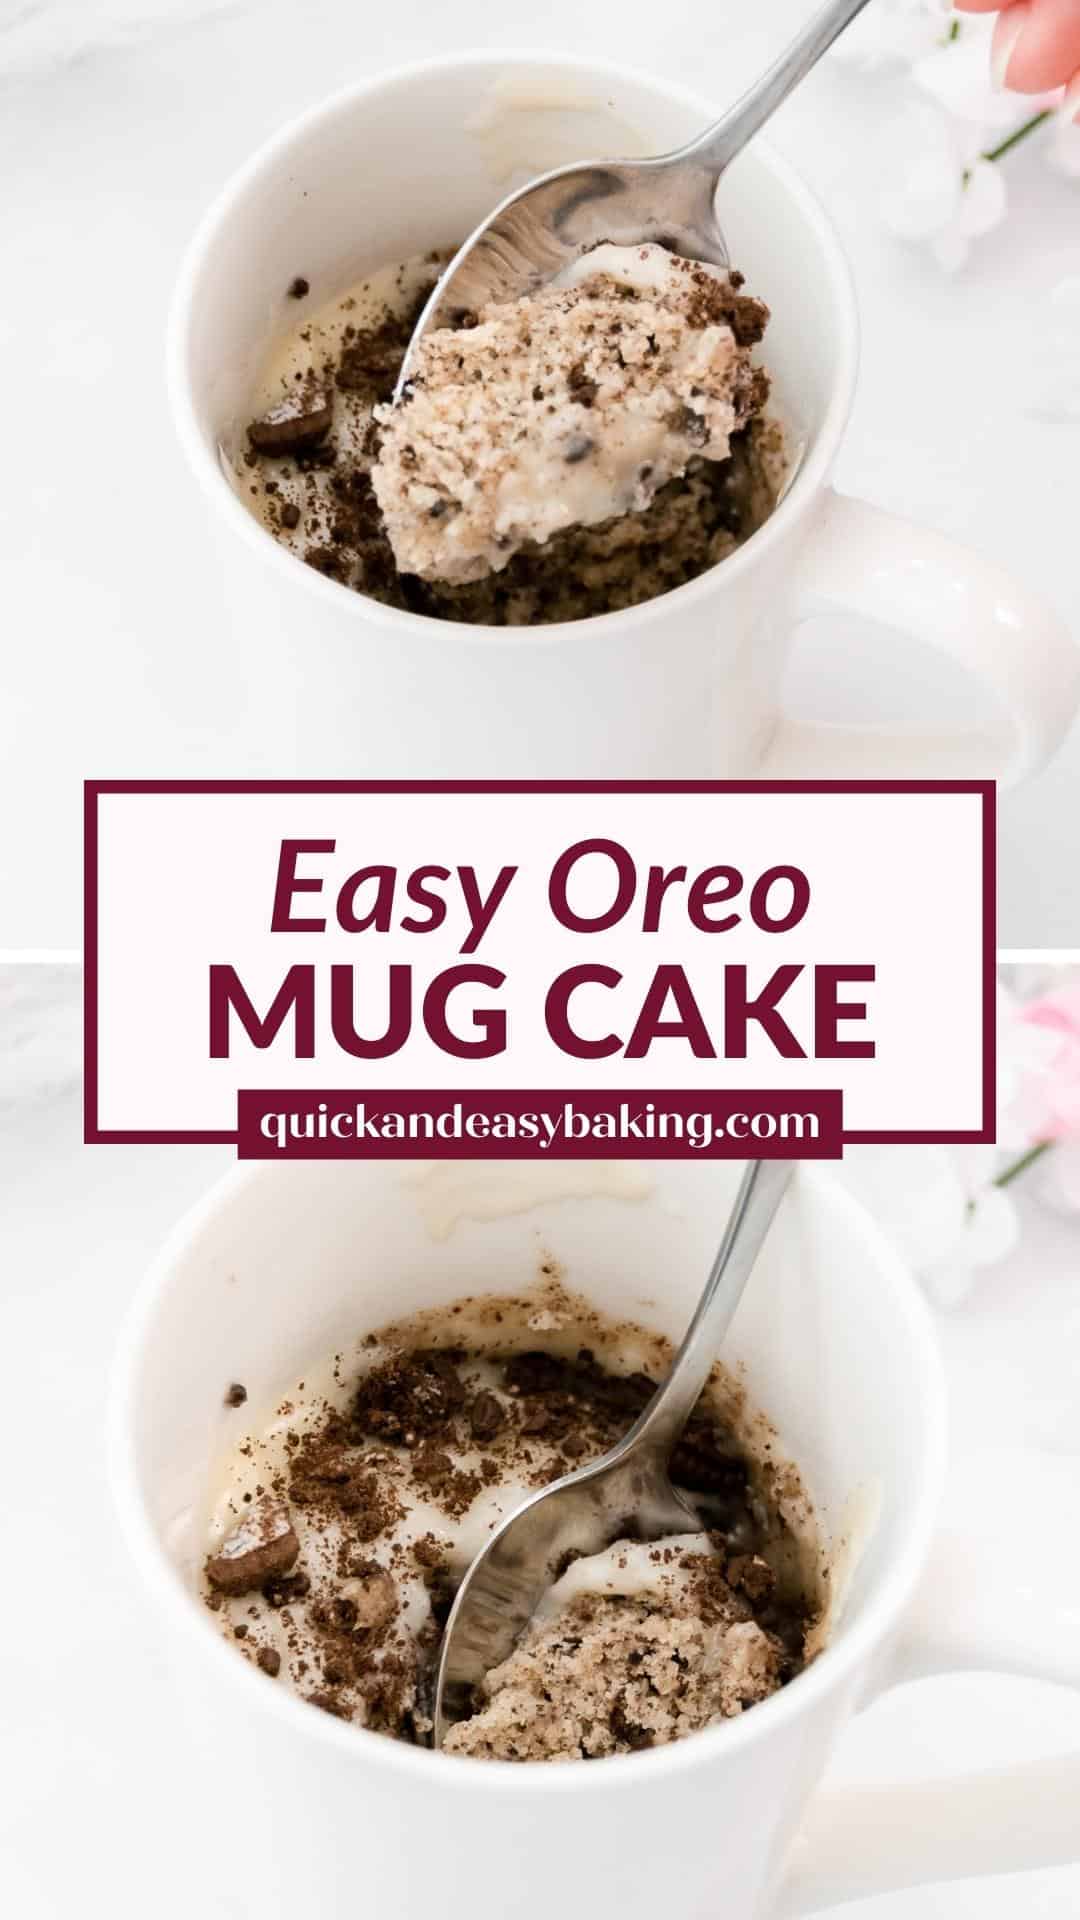 Collage with two images of mug cake with oreos and text.